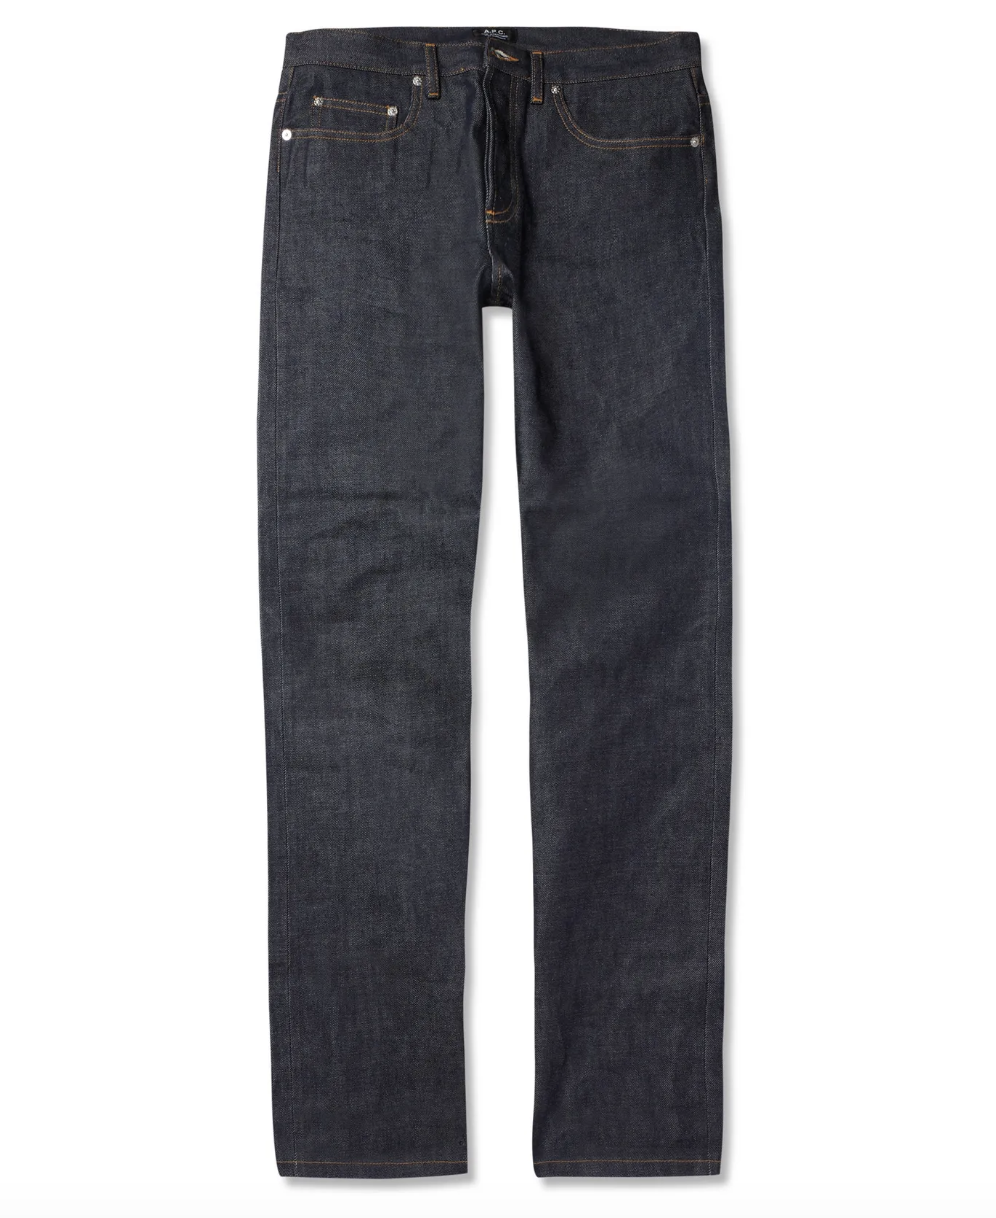 relaxed fit selvedge denim jeans